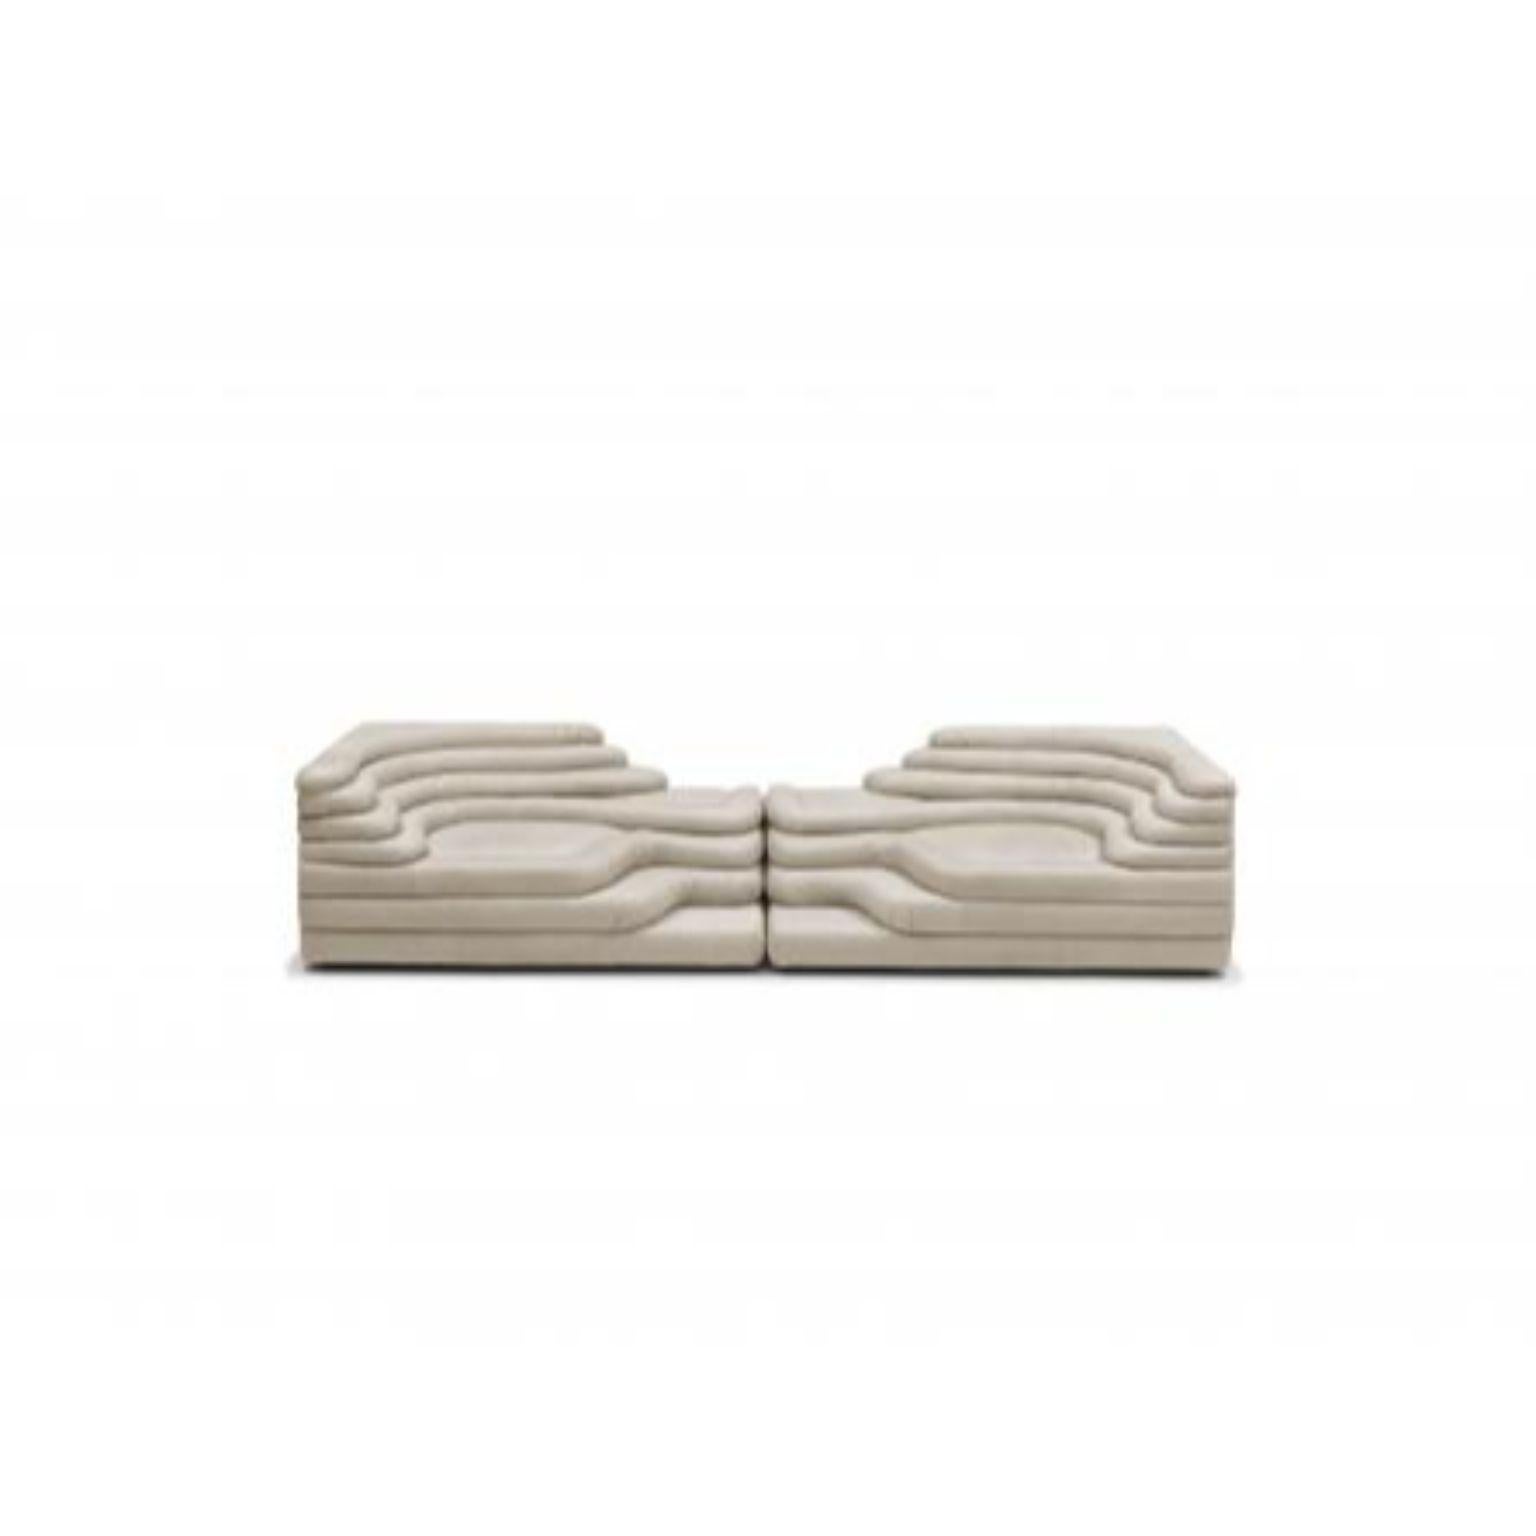 DS-1025 sofa by De Sede
Designer: Ubald Klug
Dimensions: left D 91 x W 156 x H 70 cm
 right D 91 x W 156 x H 70 cm
 Total: 91 x 312 x 70 cm
Materials: Leather, SEDEX upholstery with wadding cushion

Two ingeniously designed sofa elements are